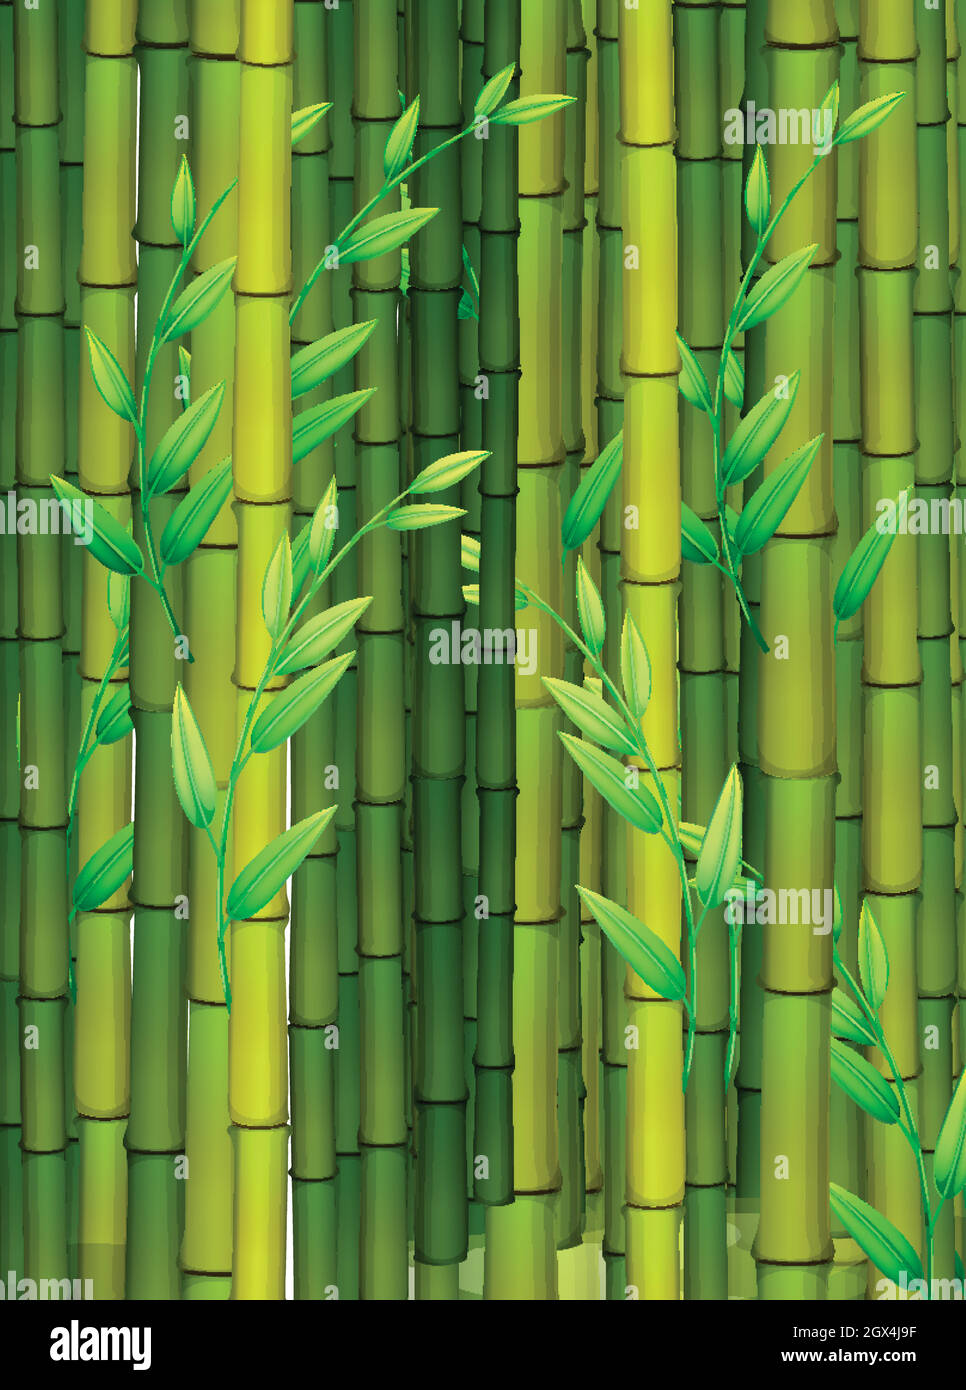 Bamboo Simple Cartoon Background, Bamboo, Green, Green Bamboo Background  Image And Wallpaper for Free Download